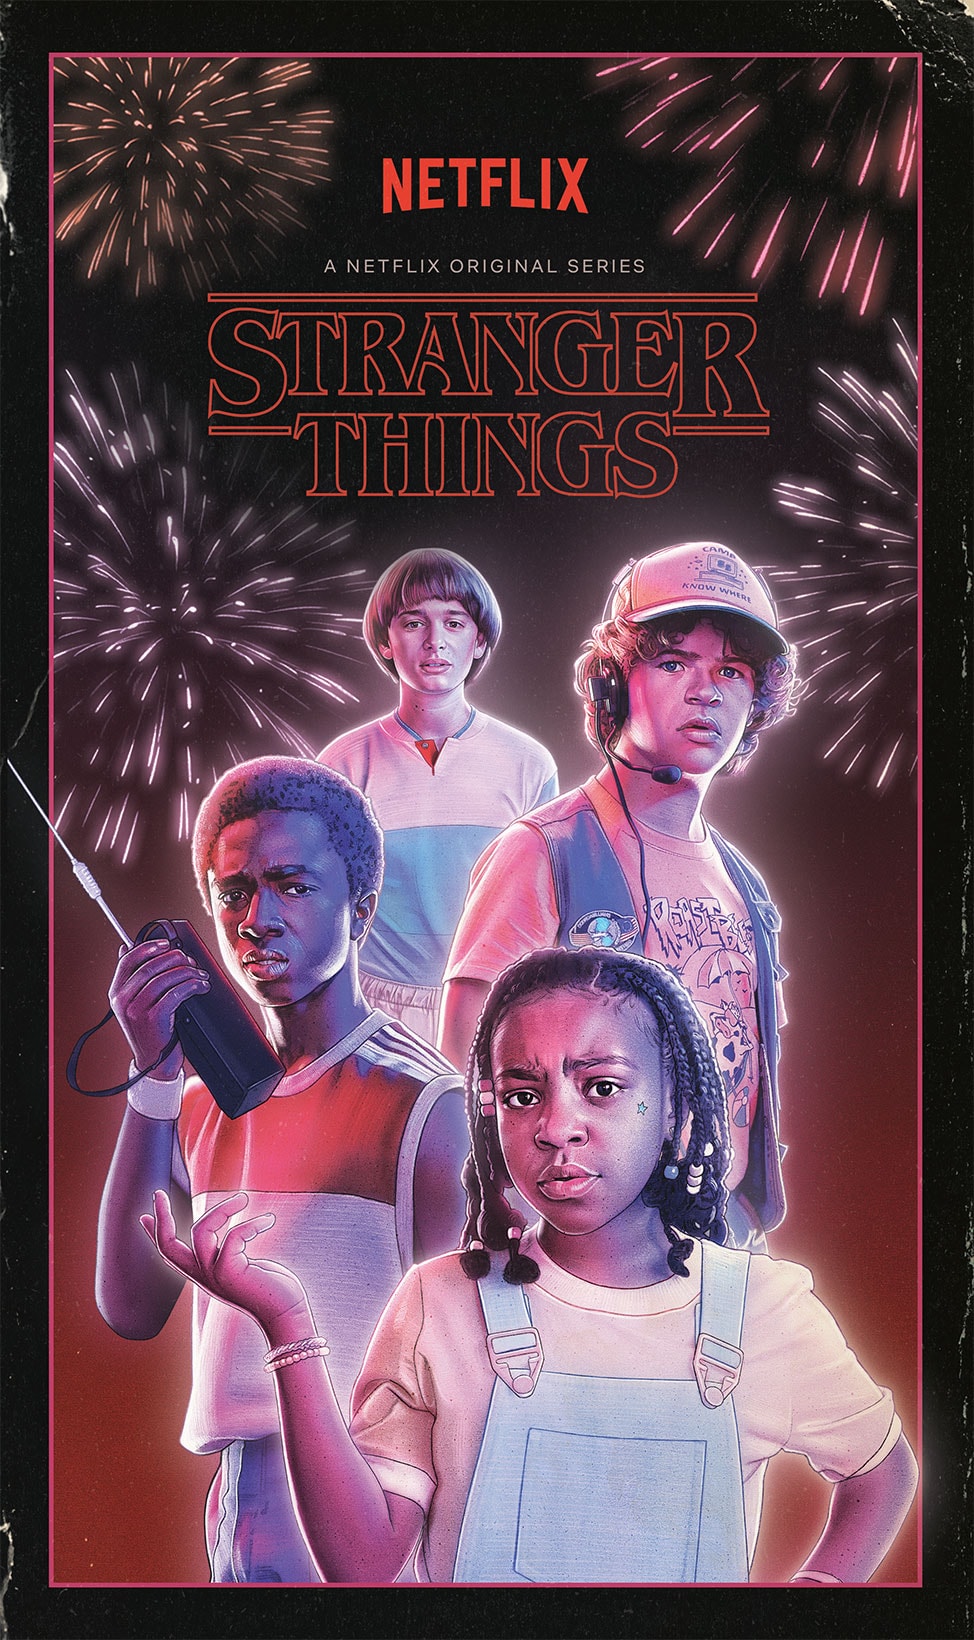 6 Things to Learn About Marketing from Stranger Things